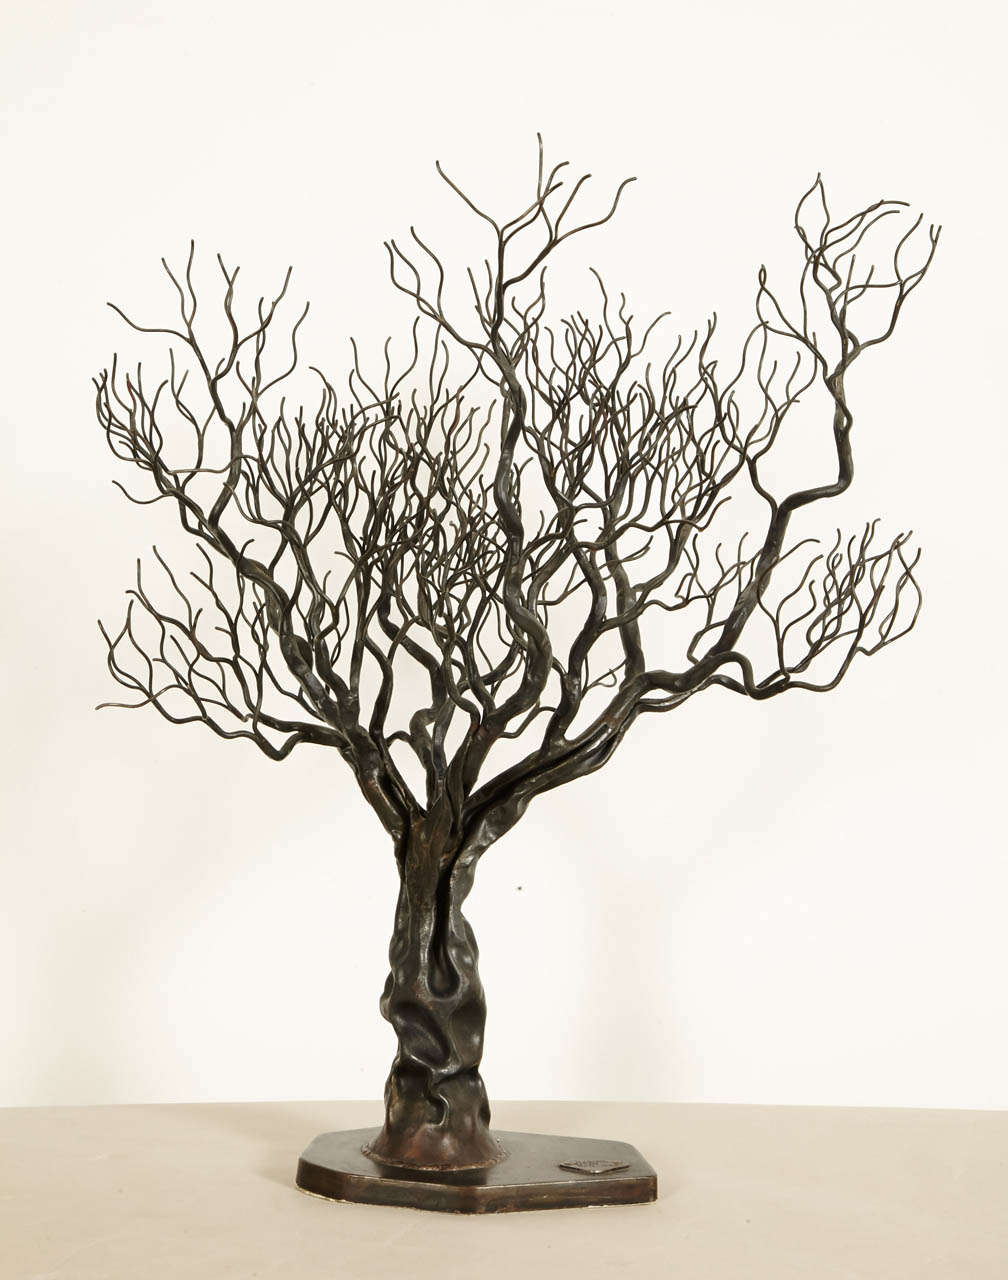 Forged iron olivetree, 2012, by Manuel Simon (1978 -)
Patinated iron sculpture,unique piece.
Dated and signed triangular base.

Manuel SIMON, was a student at Beaux Arts school in Marseille (South France), then worked near the sculptor François